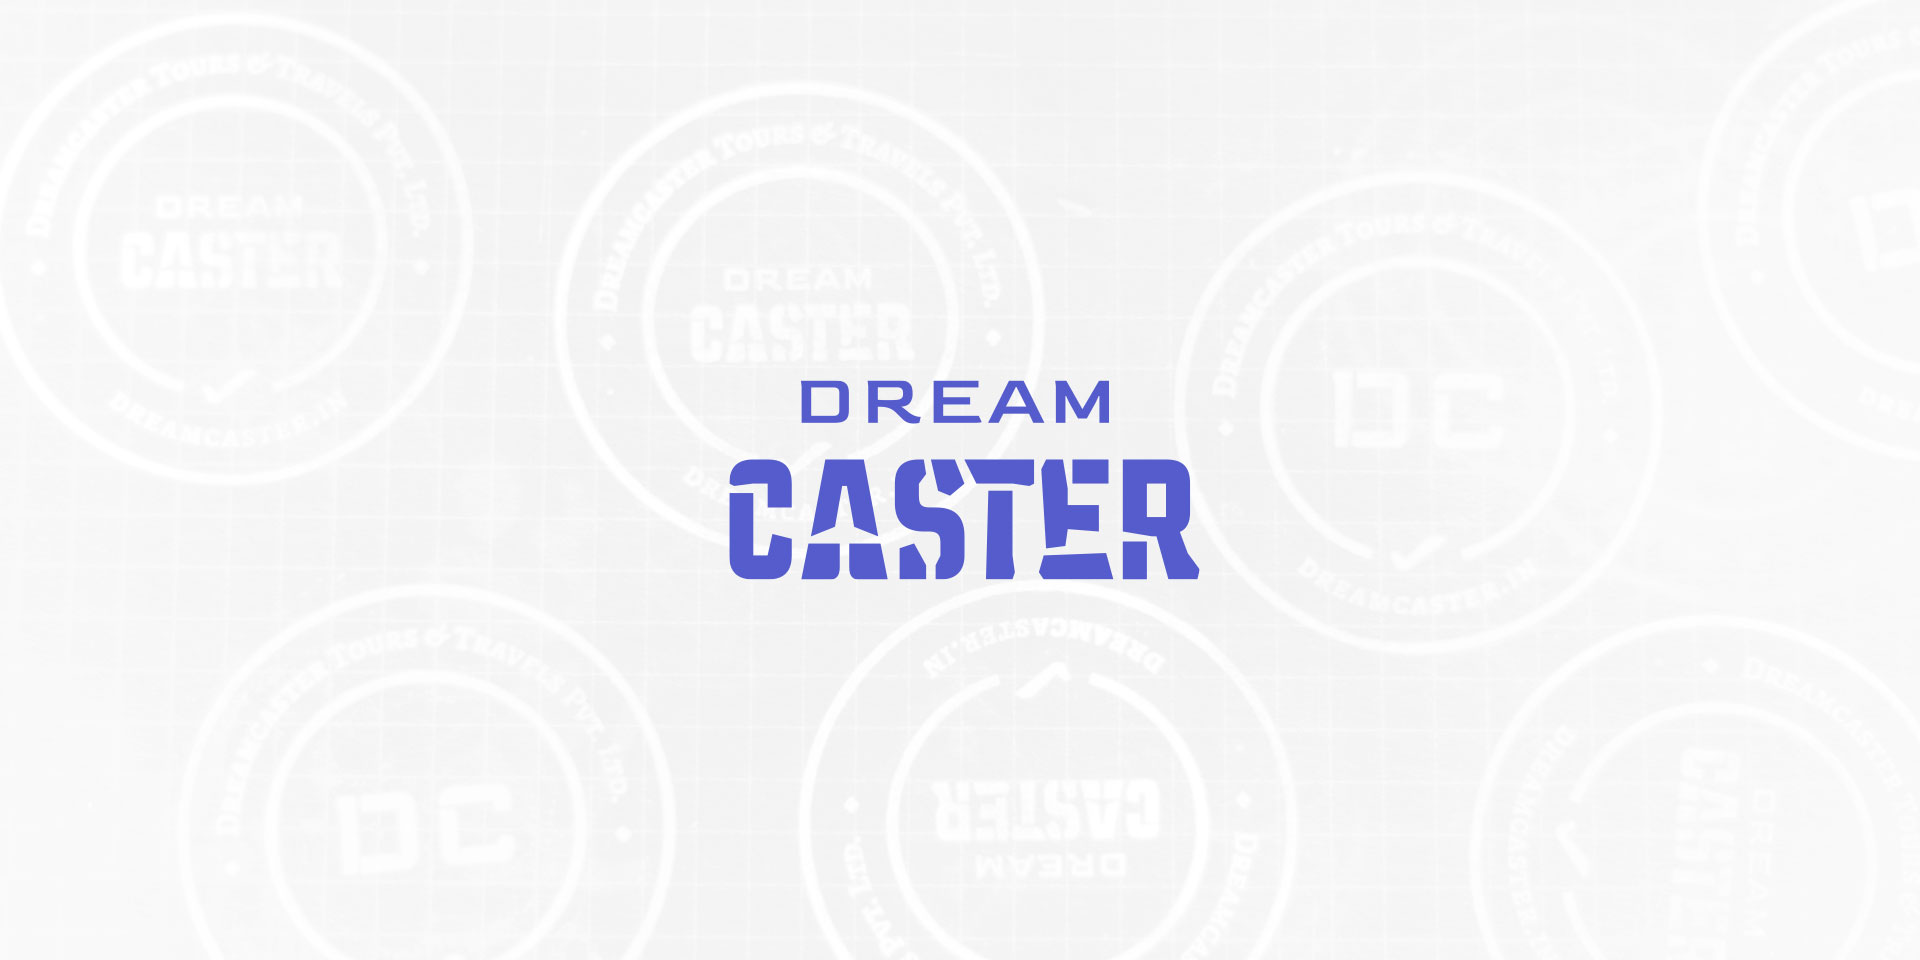 Dream Caster Tours and Travels - Branding - Logotype7